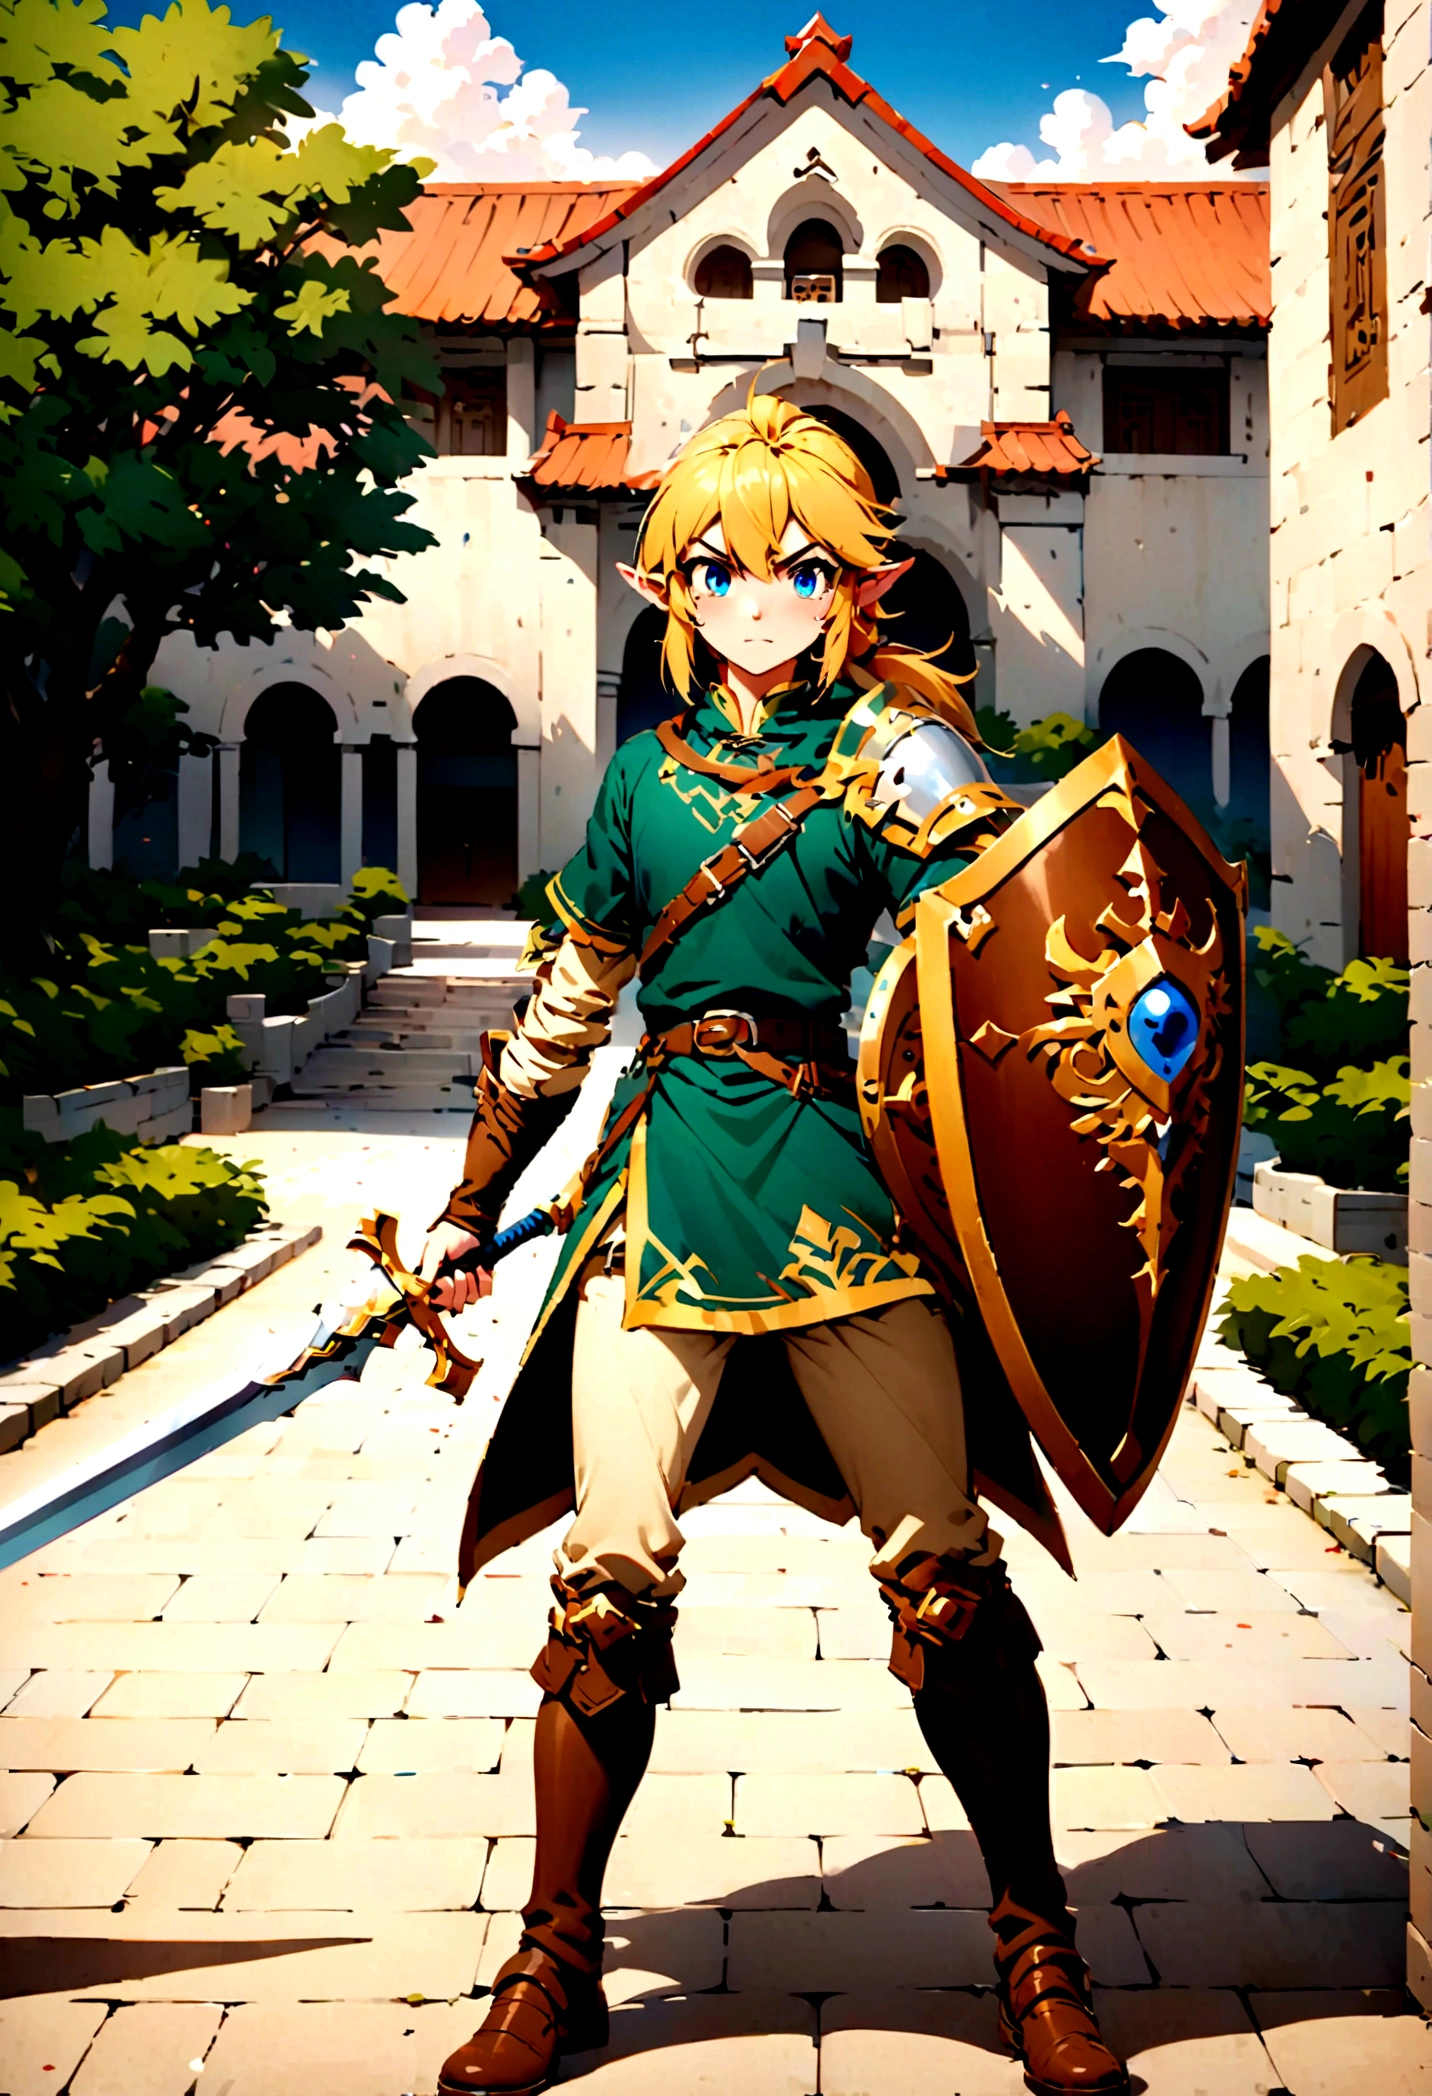 Link from Zelda tears of the Kingdom holding his sword and shield, standing in a Chinese college campus